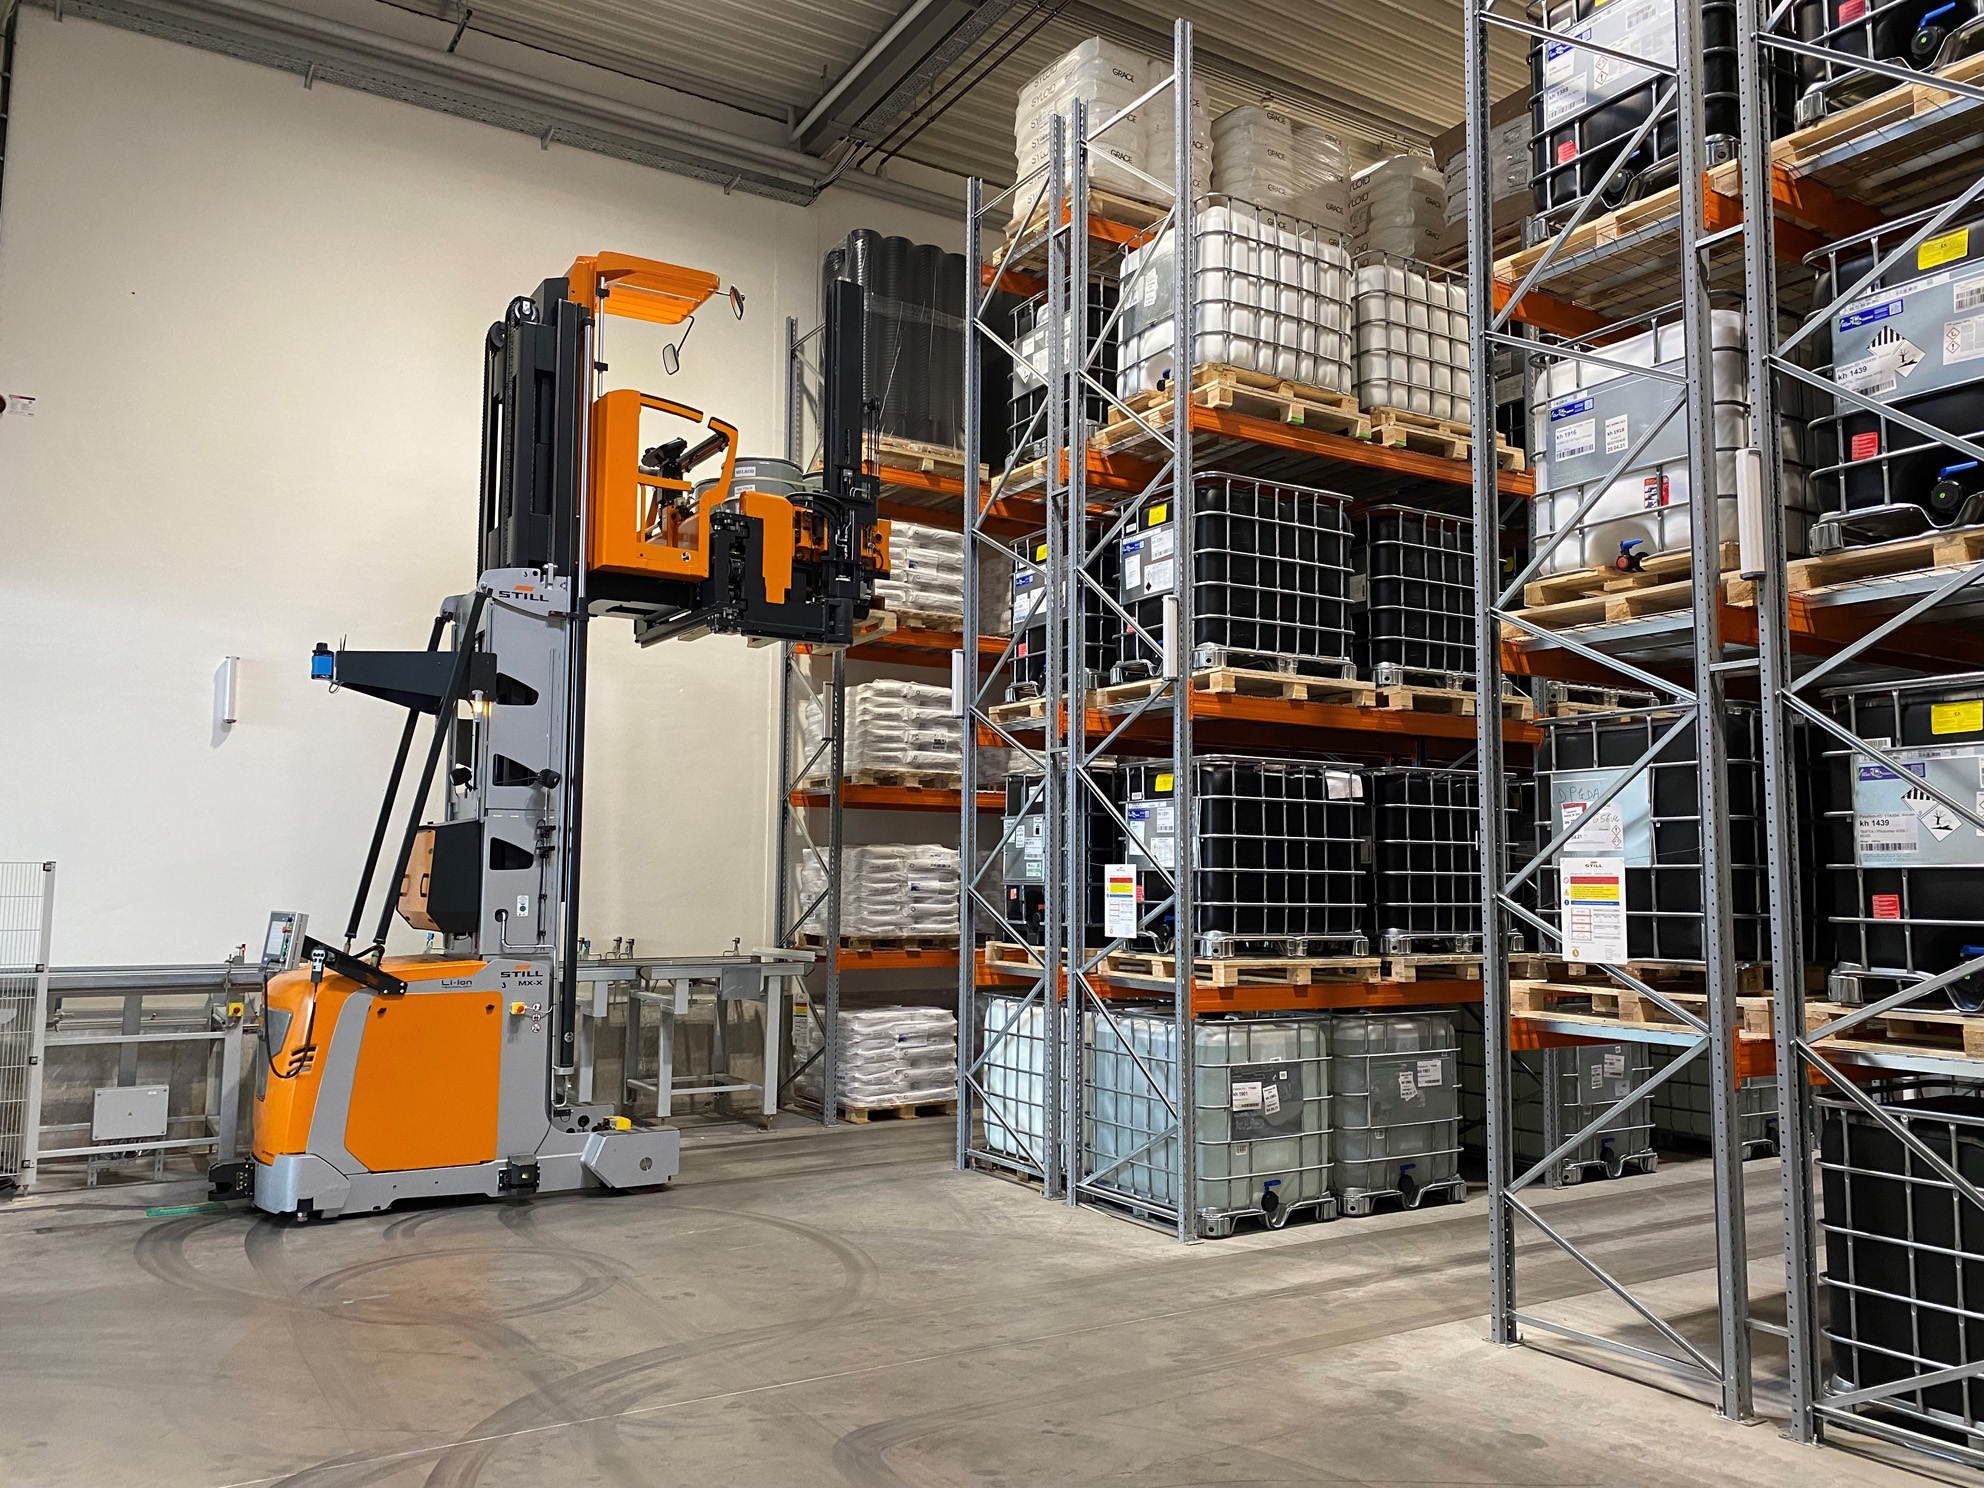 PLANTAG starts operating with an automated warehouse